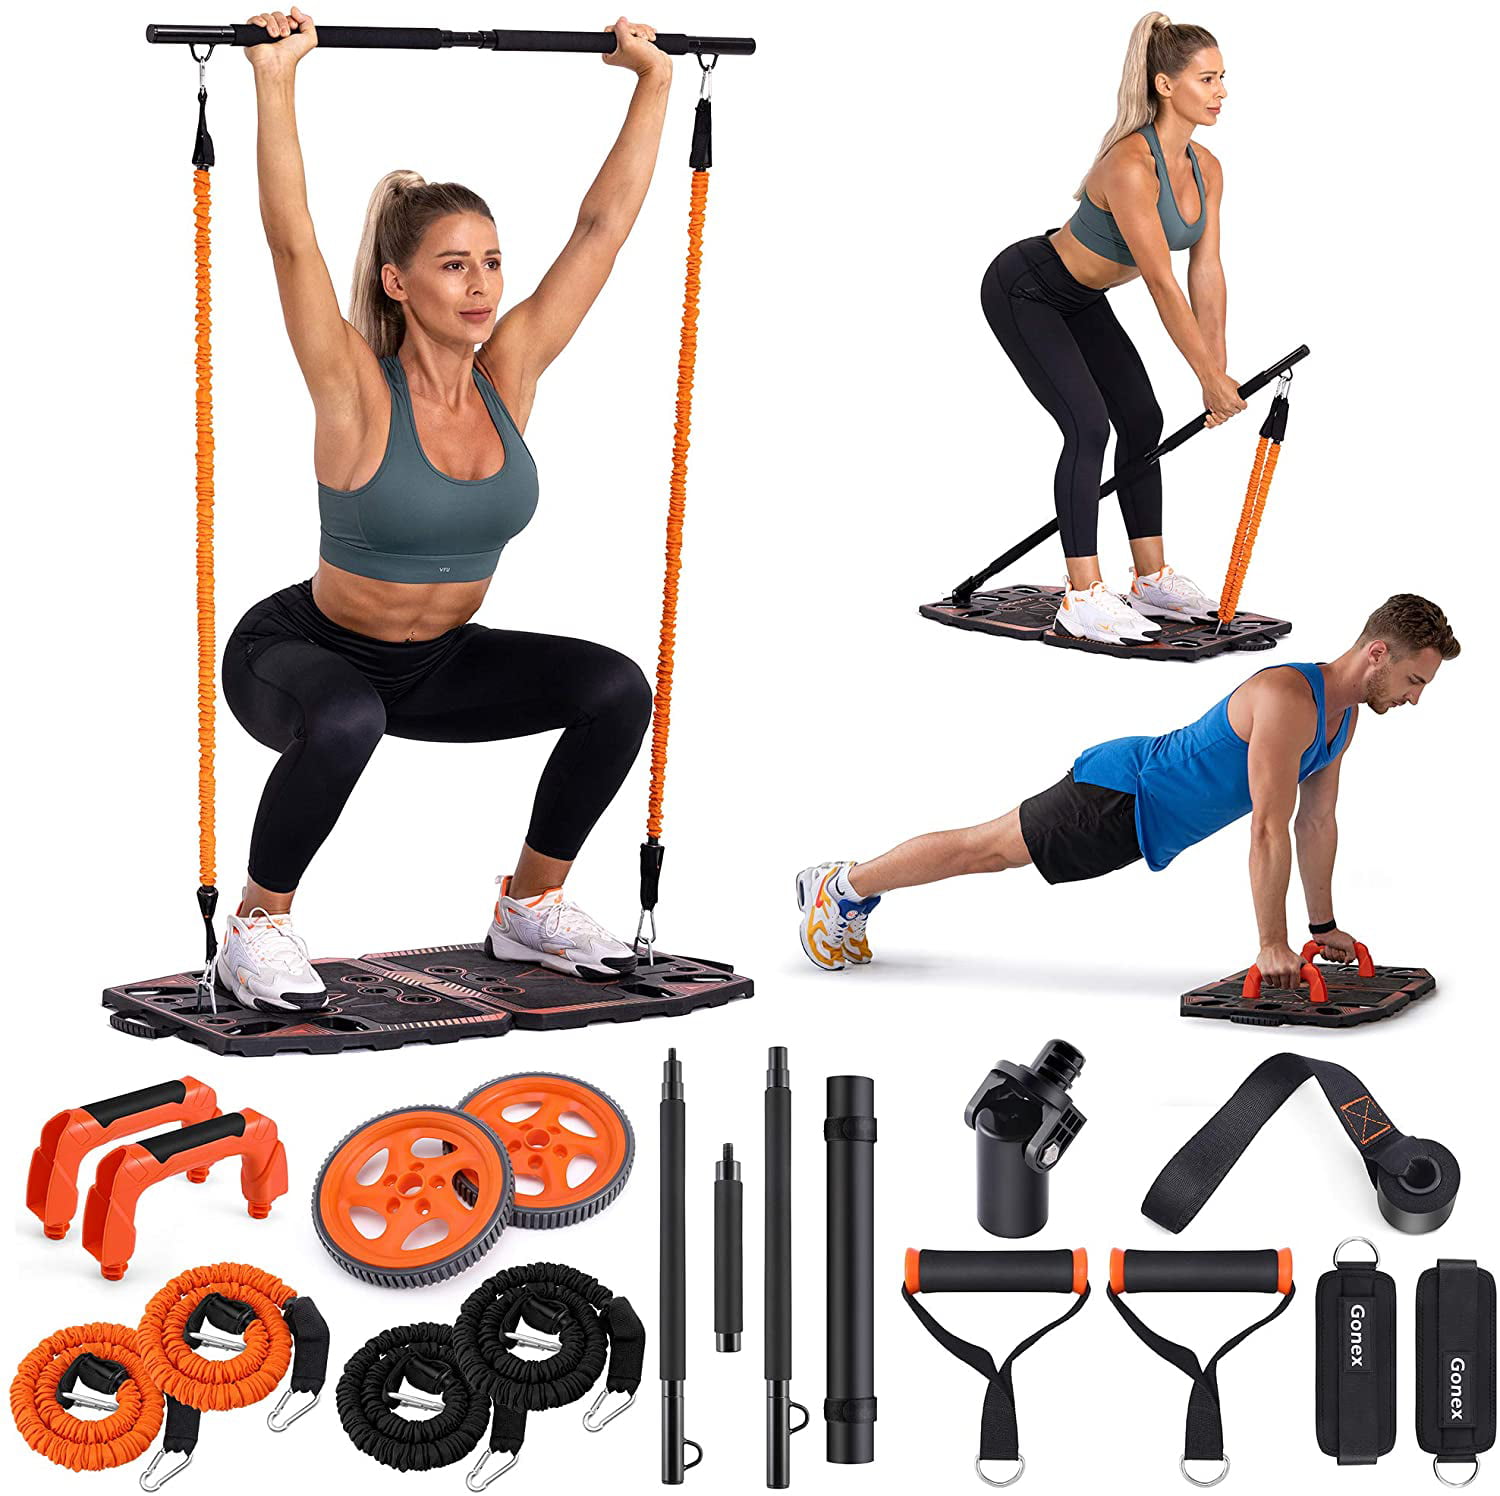 Gonex Portable Home Gym Workout Equipment with 10 Exercise Accessories ...